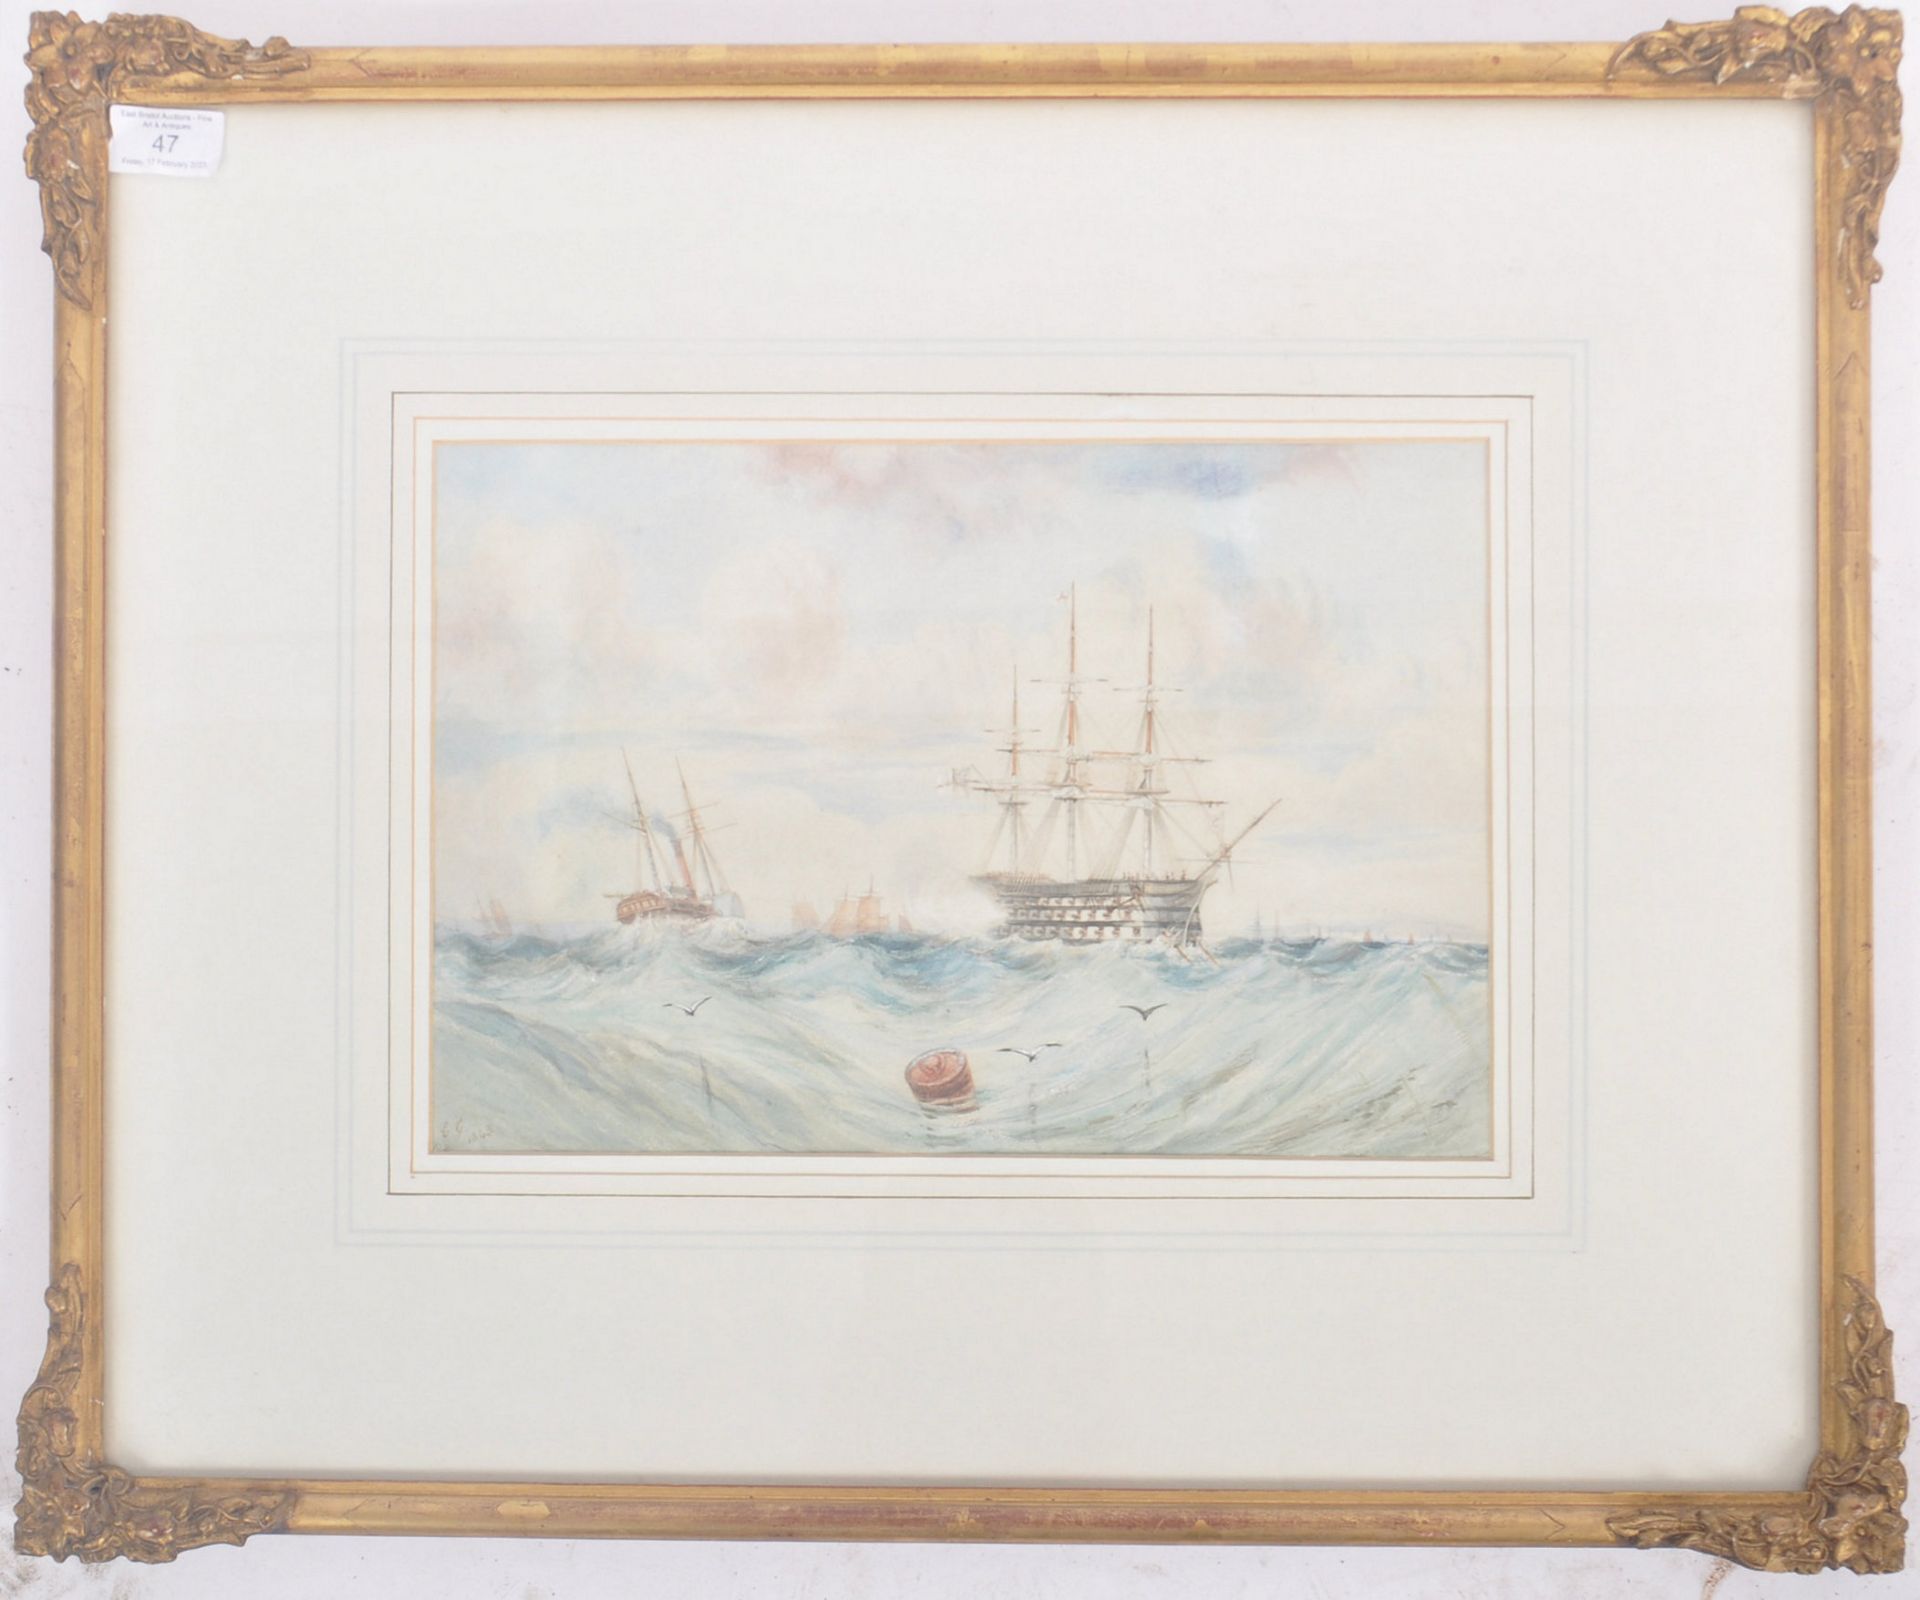 MID 19TH CENTURY VICTORIAN MARITIME WATERCOLOUR PAINTING - Image 2 of 7